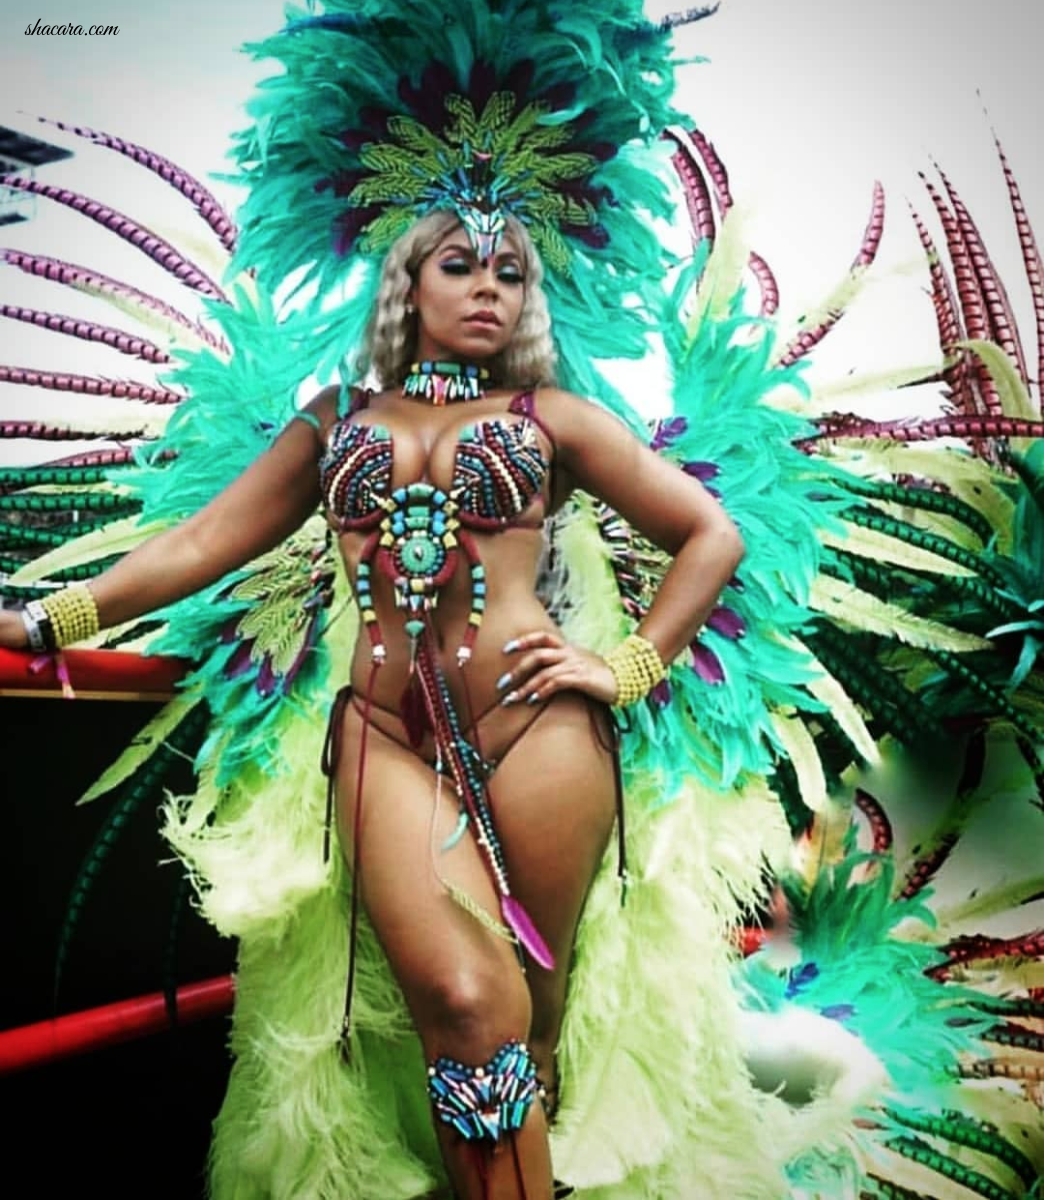 Ashanti Lived Her Best Life At Trinidad Carnival And We're Absolutely Jealous